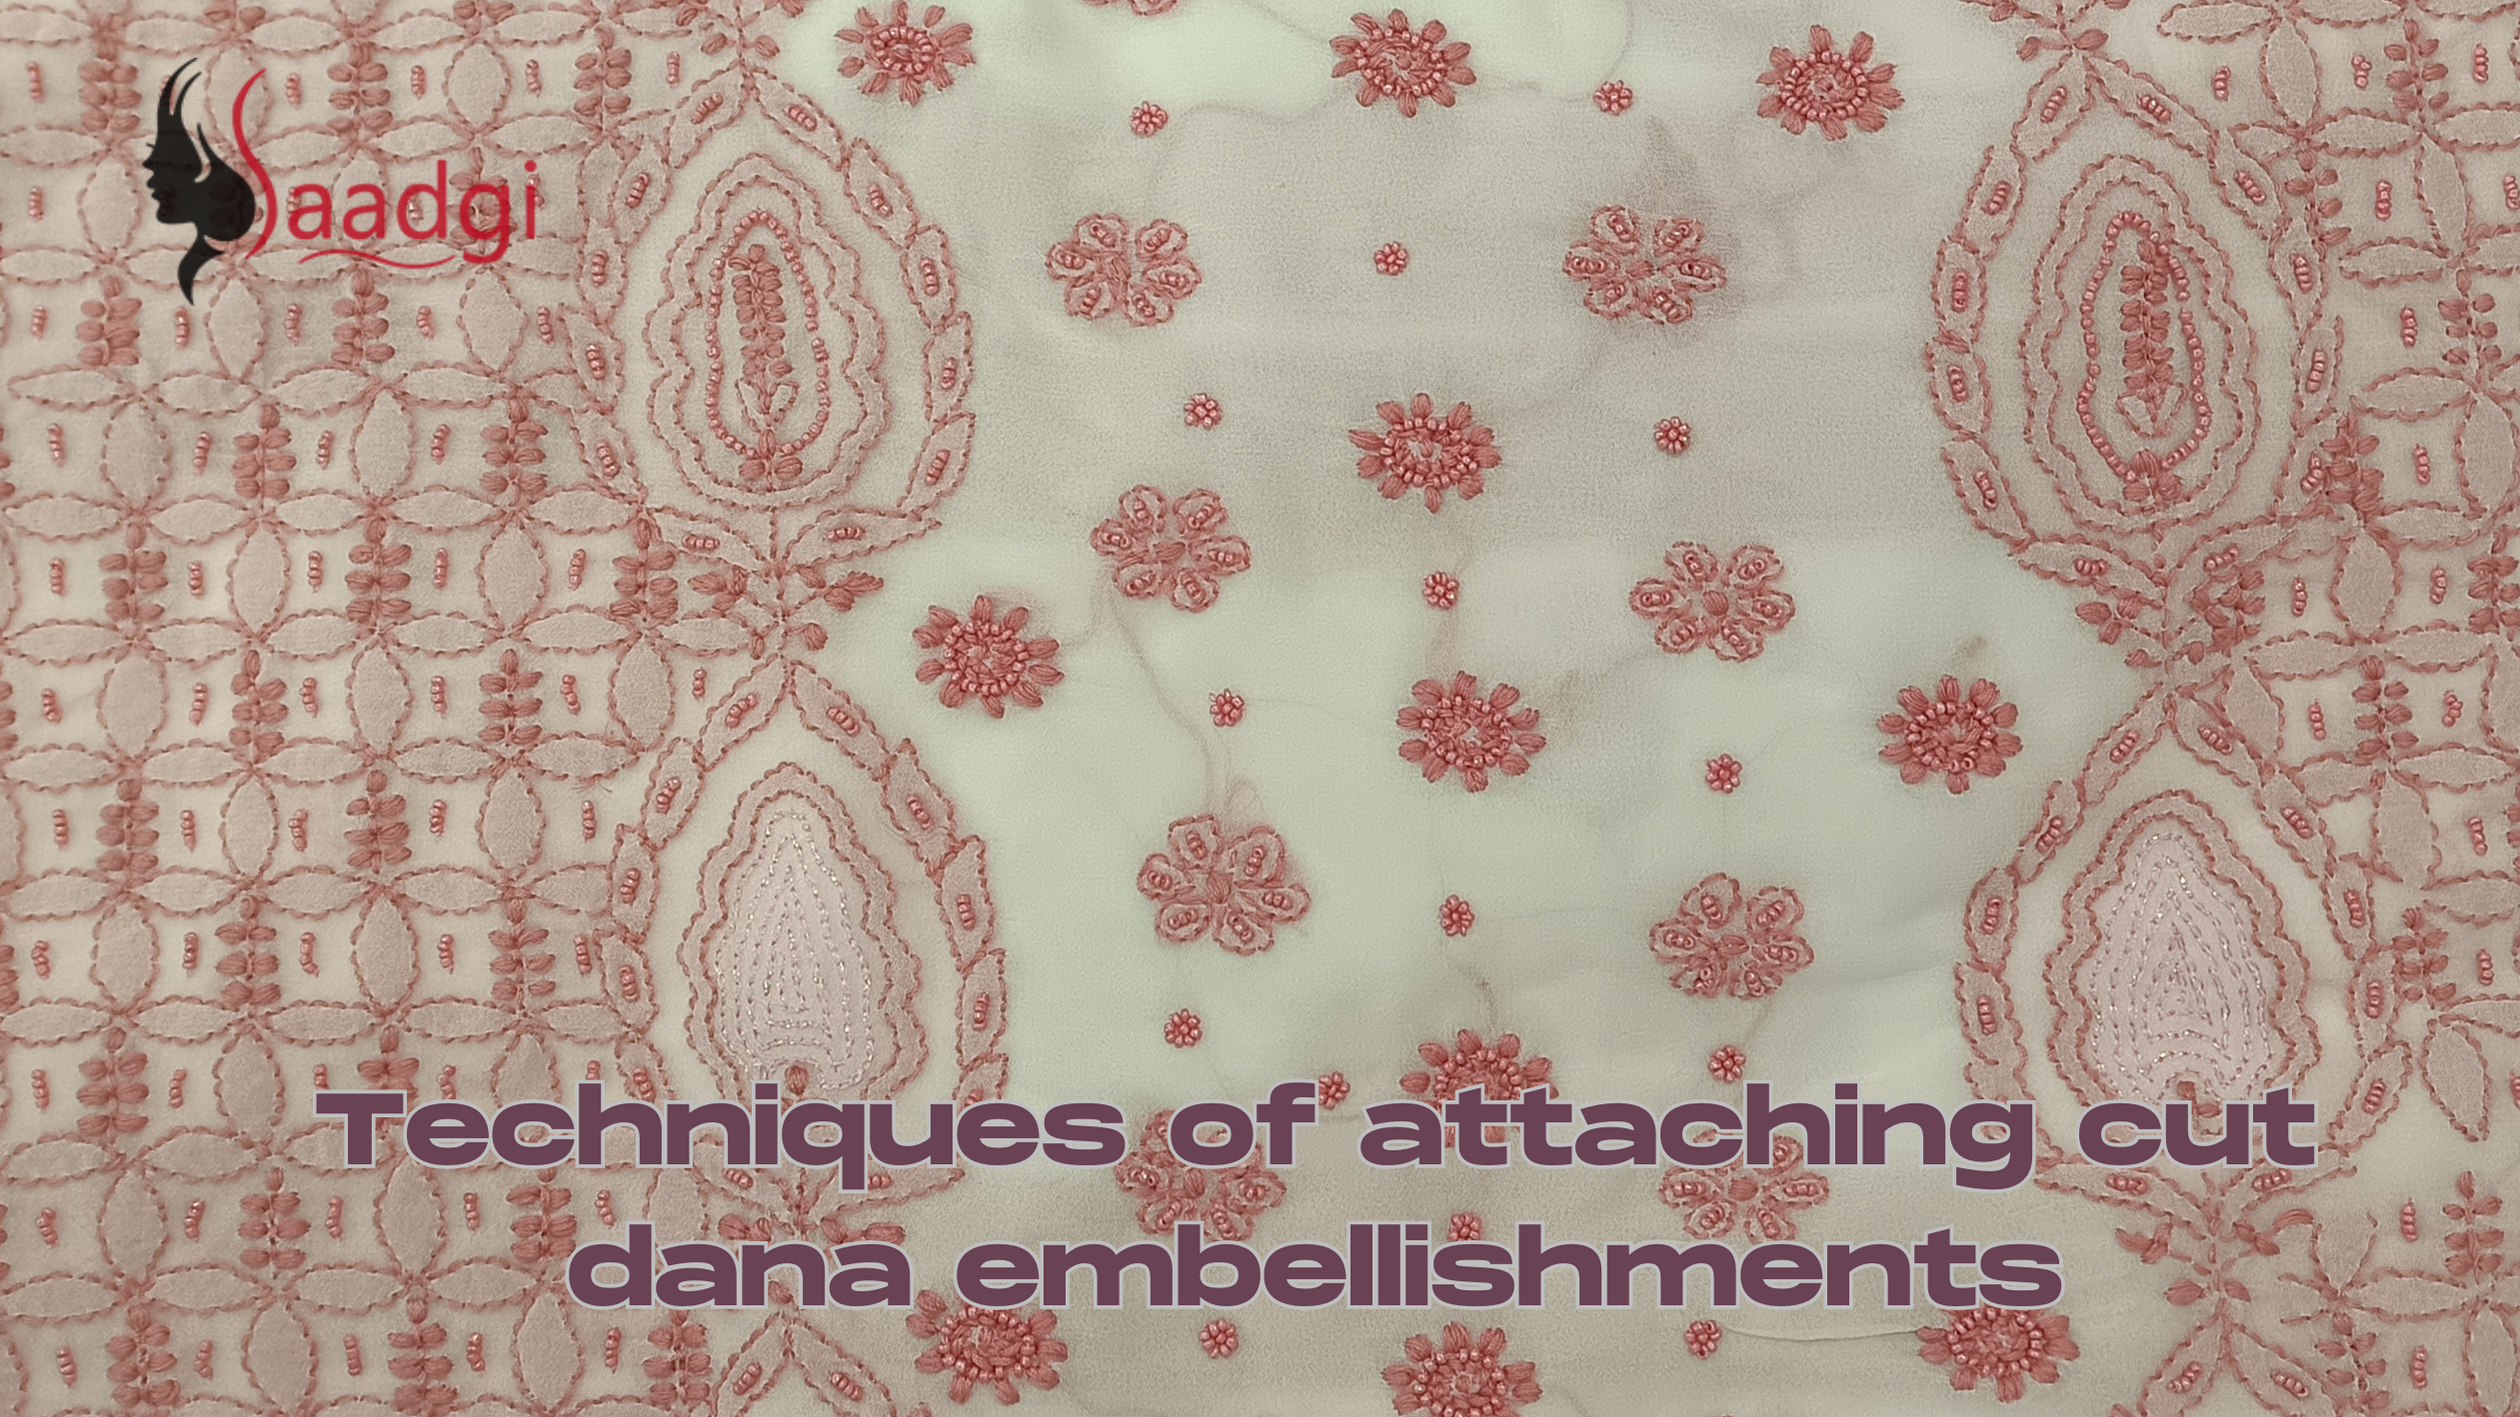 Cutdana Embroidery Sewing Magic with Stunning Designs.